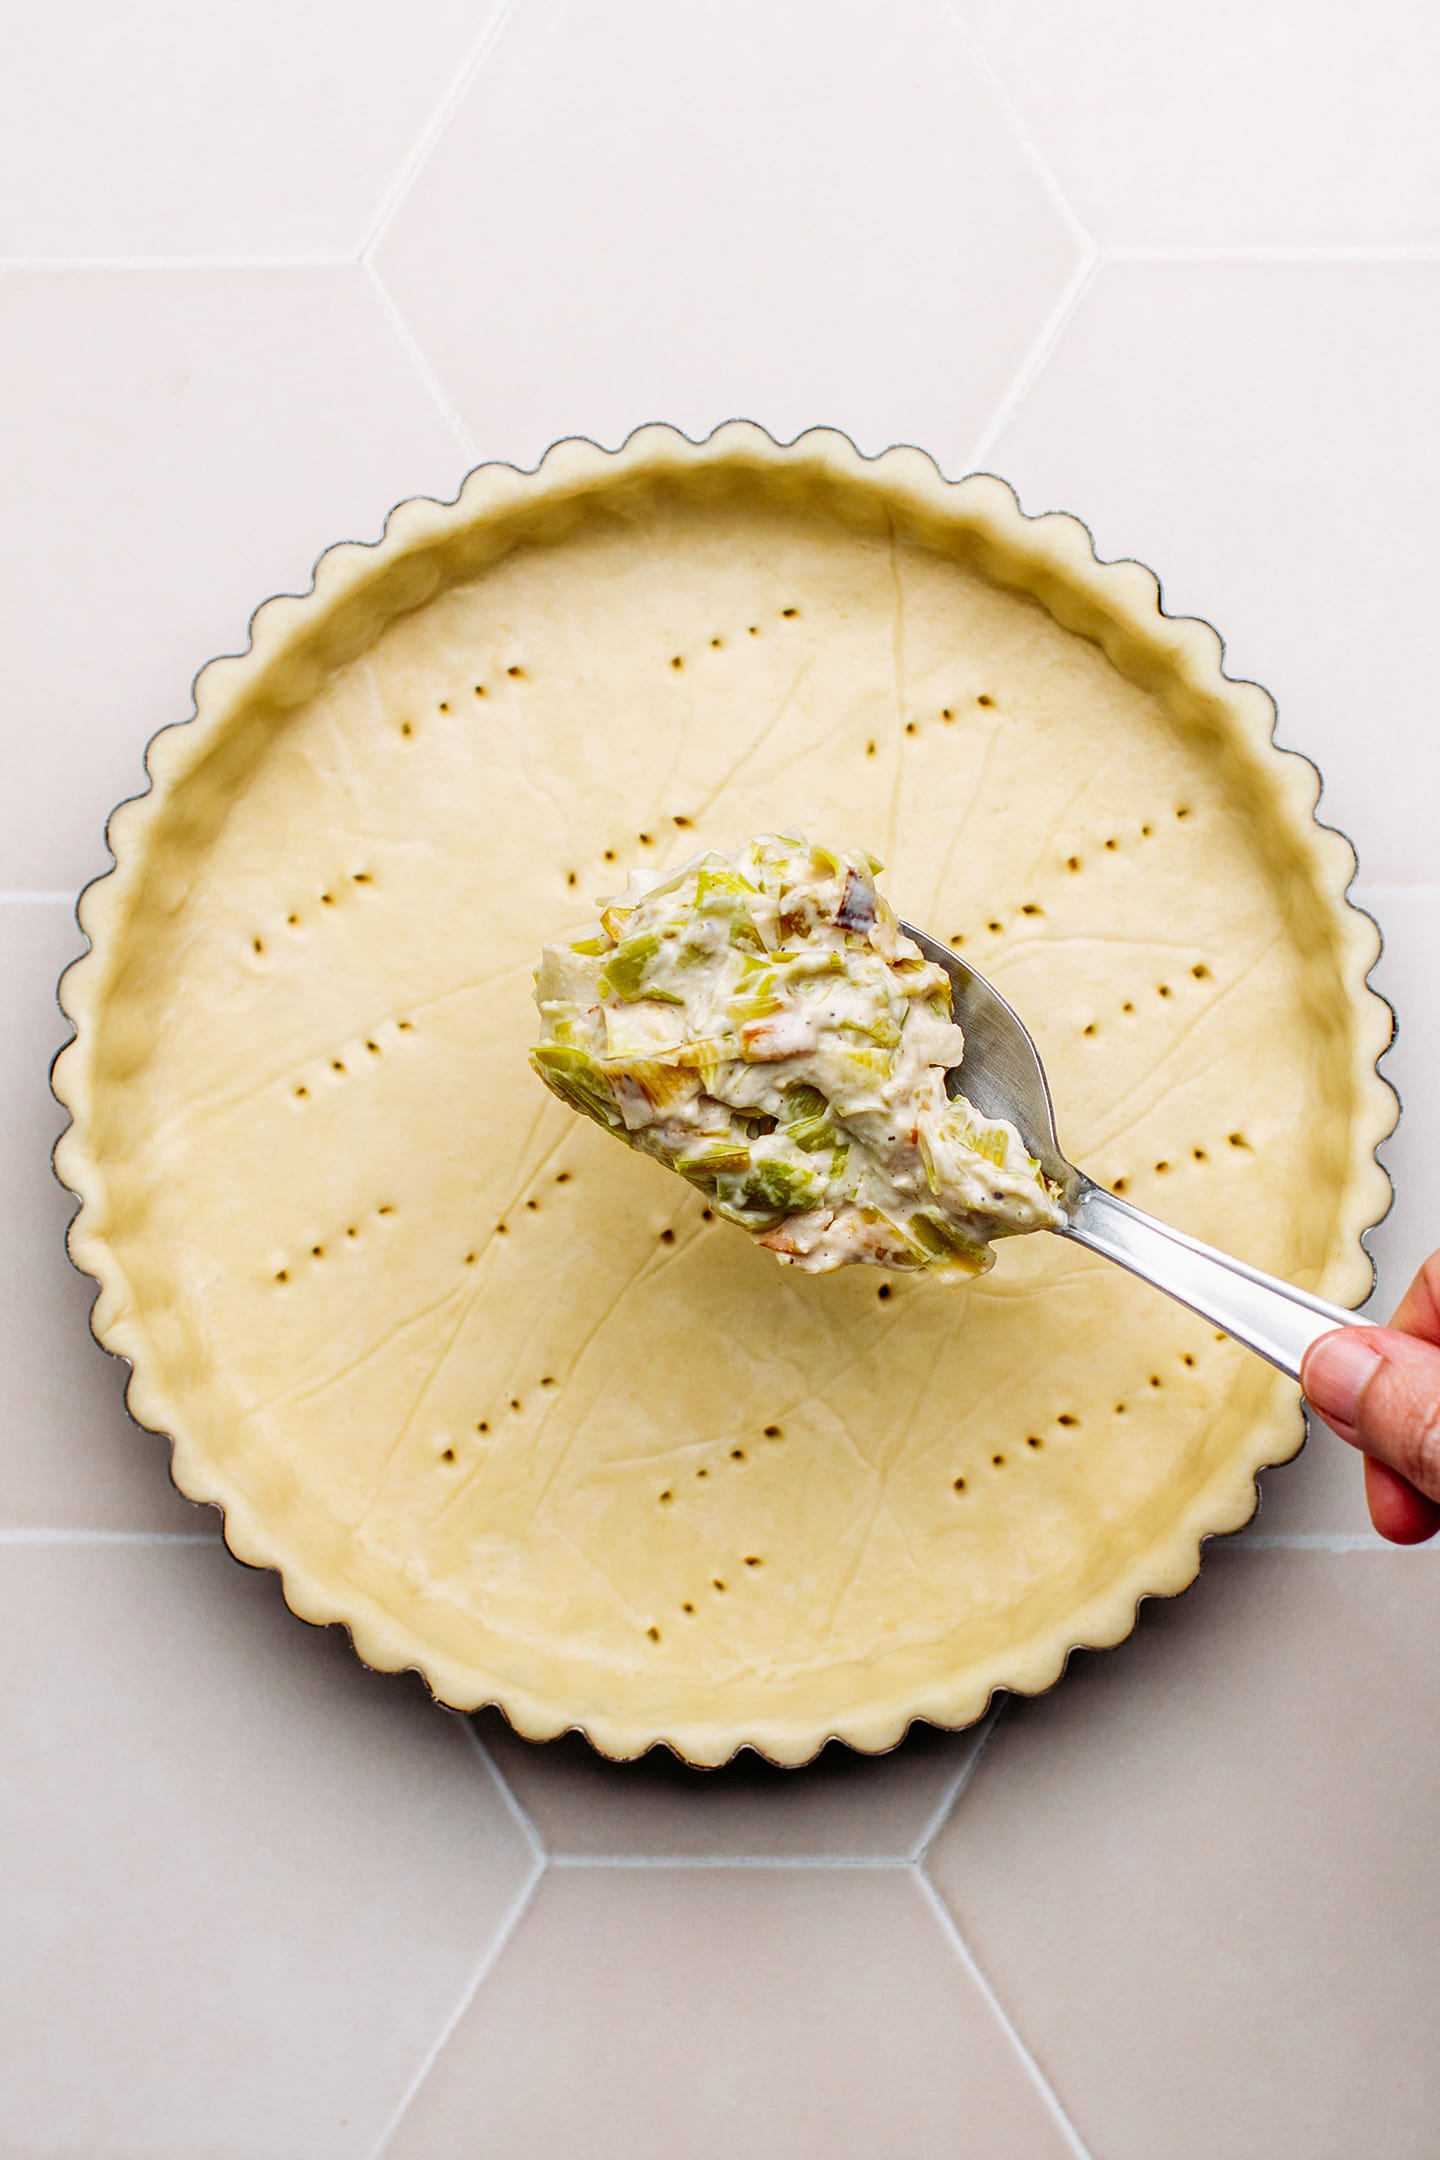 Adding leek filling on top of a pie crust.